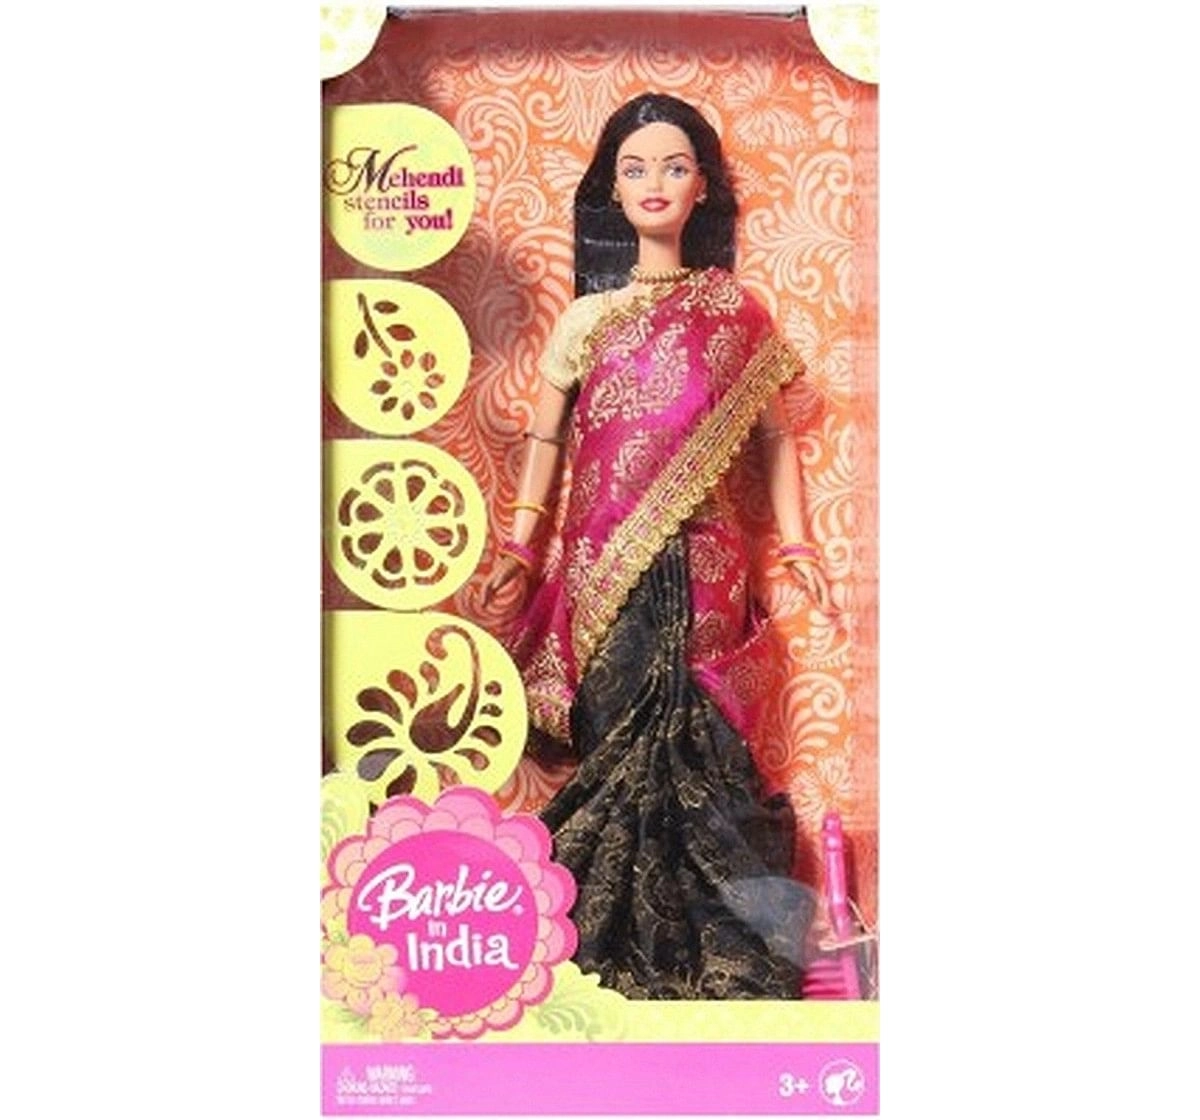 Barbie in India in New Look, New Brocade & Silk Sari Dolls & Accessories for Kids age 3Y+, Assorted